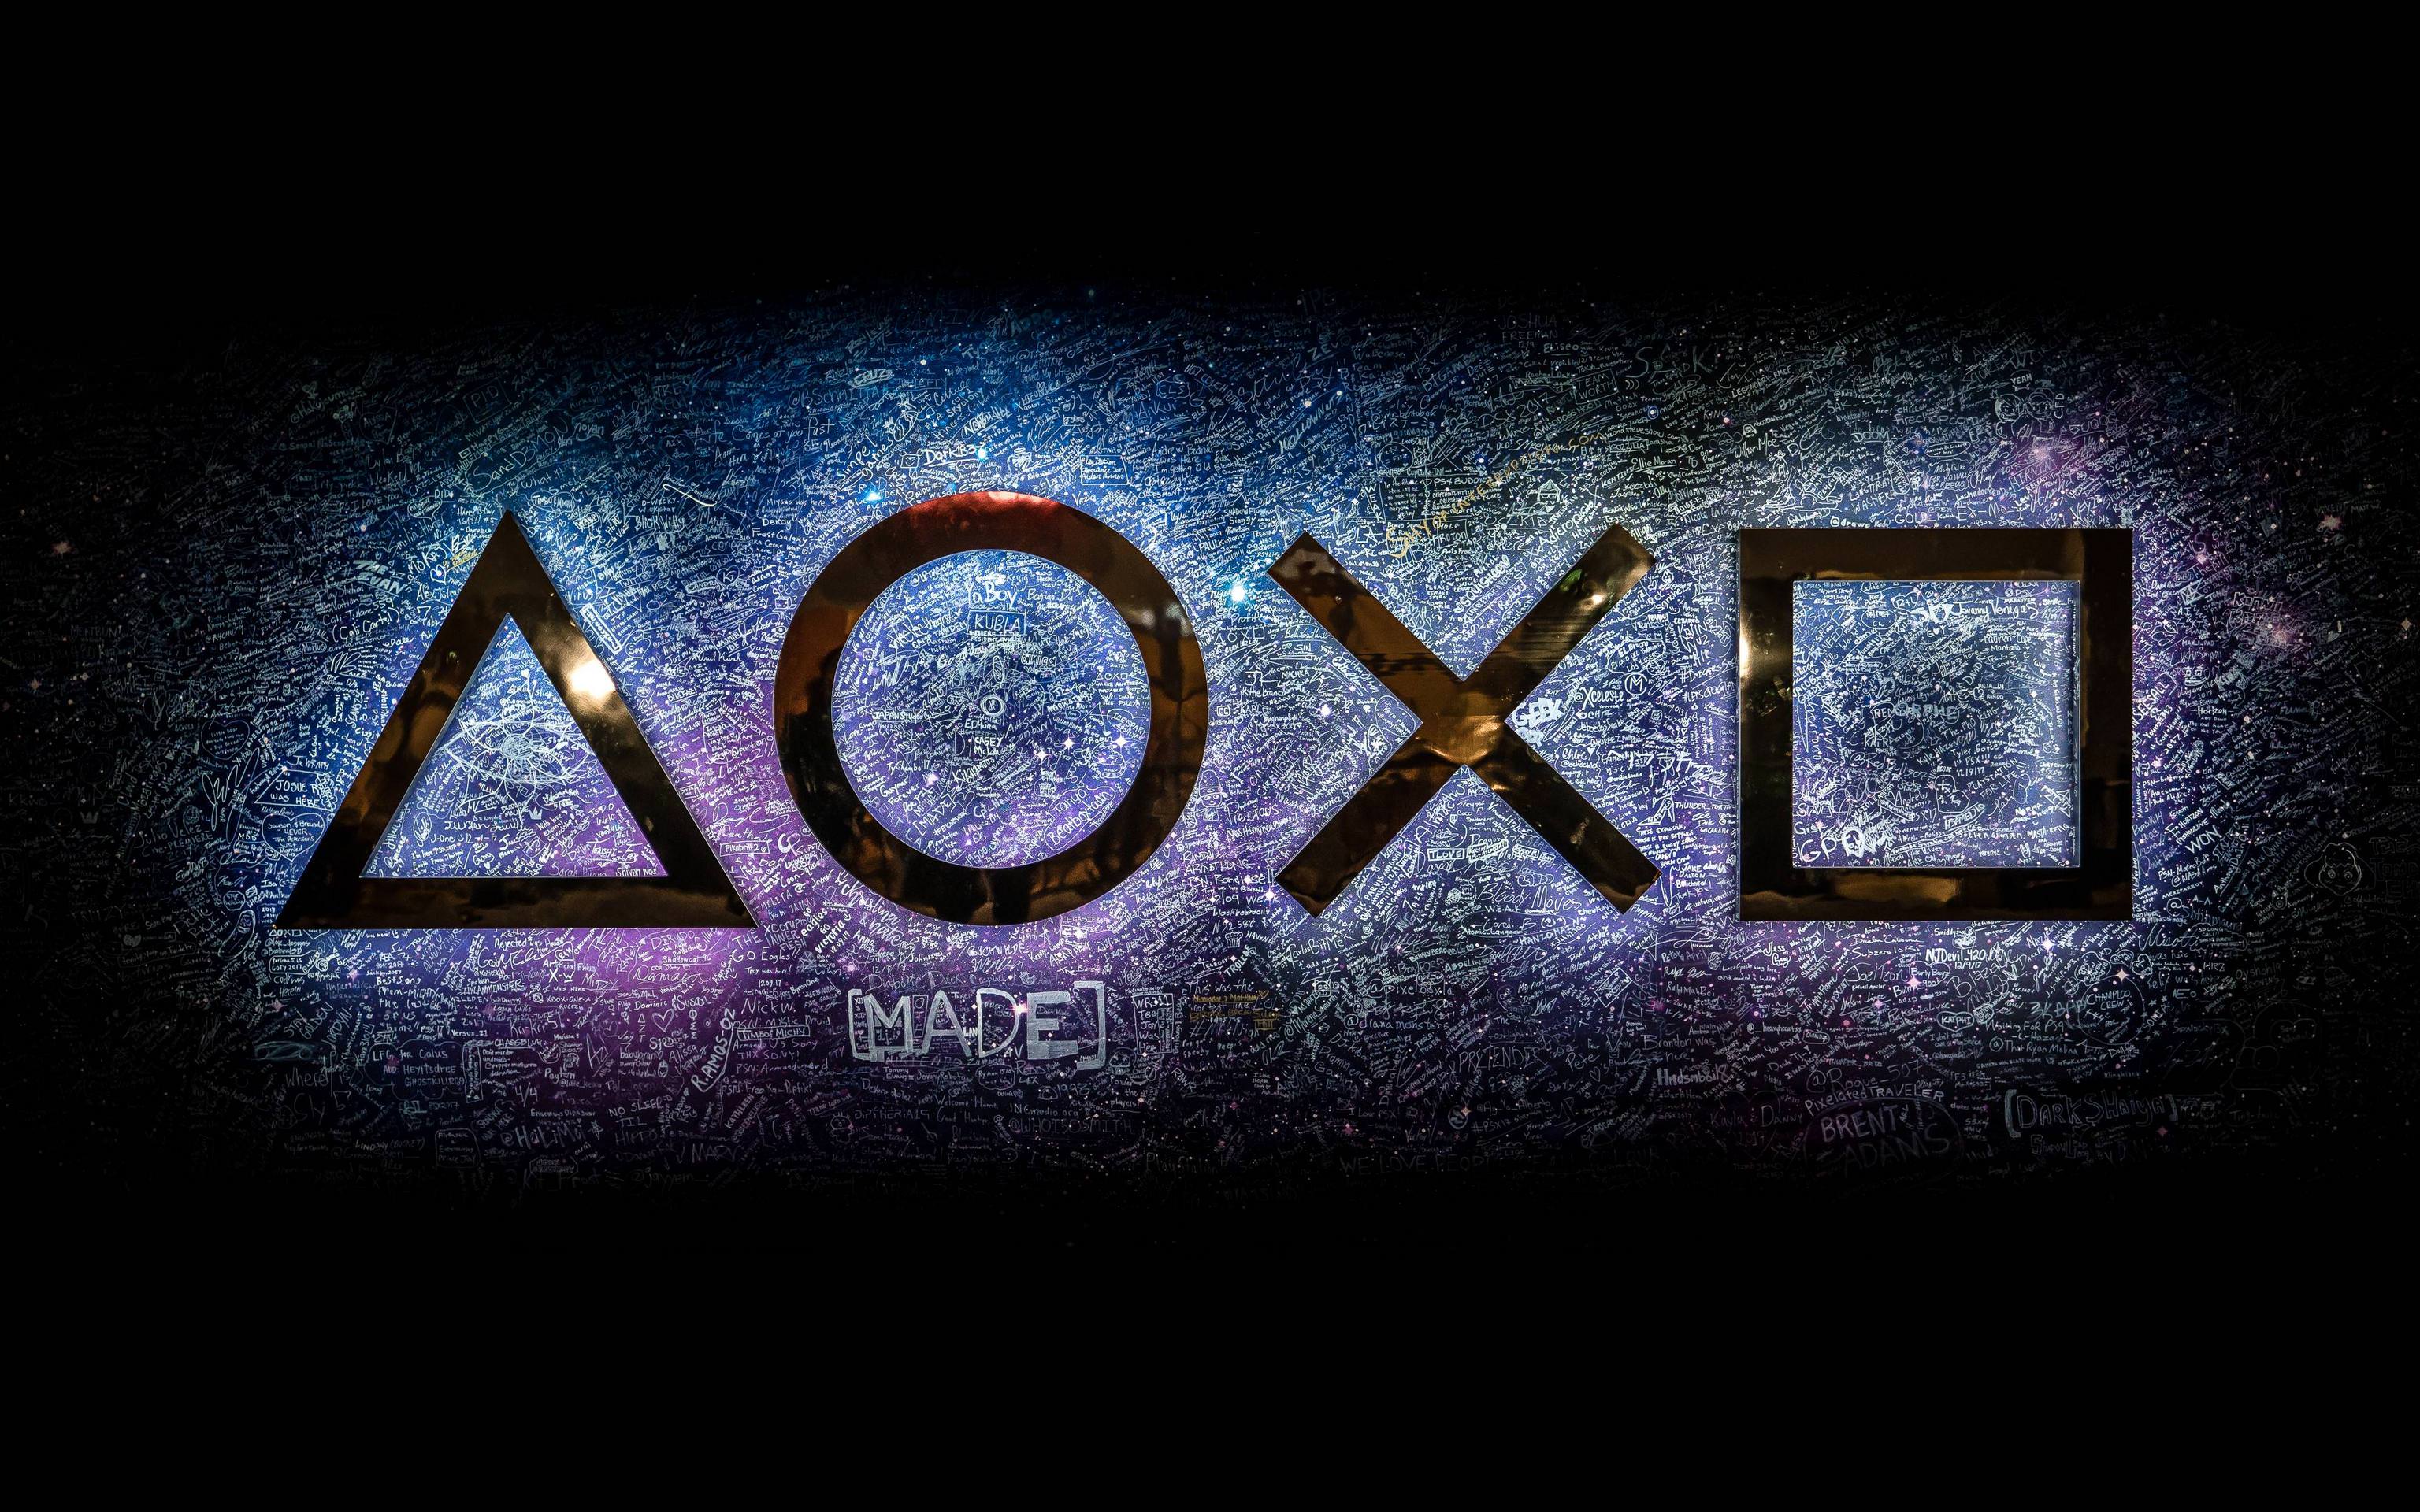 3840x2160] 4k Wallpaper Of A Signed Wall At Psx - Ps4 Background - HD Wallpaper 